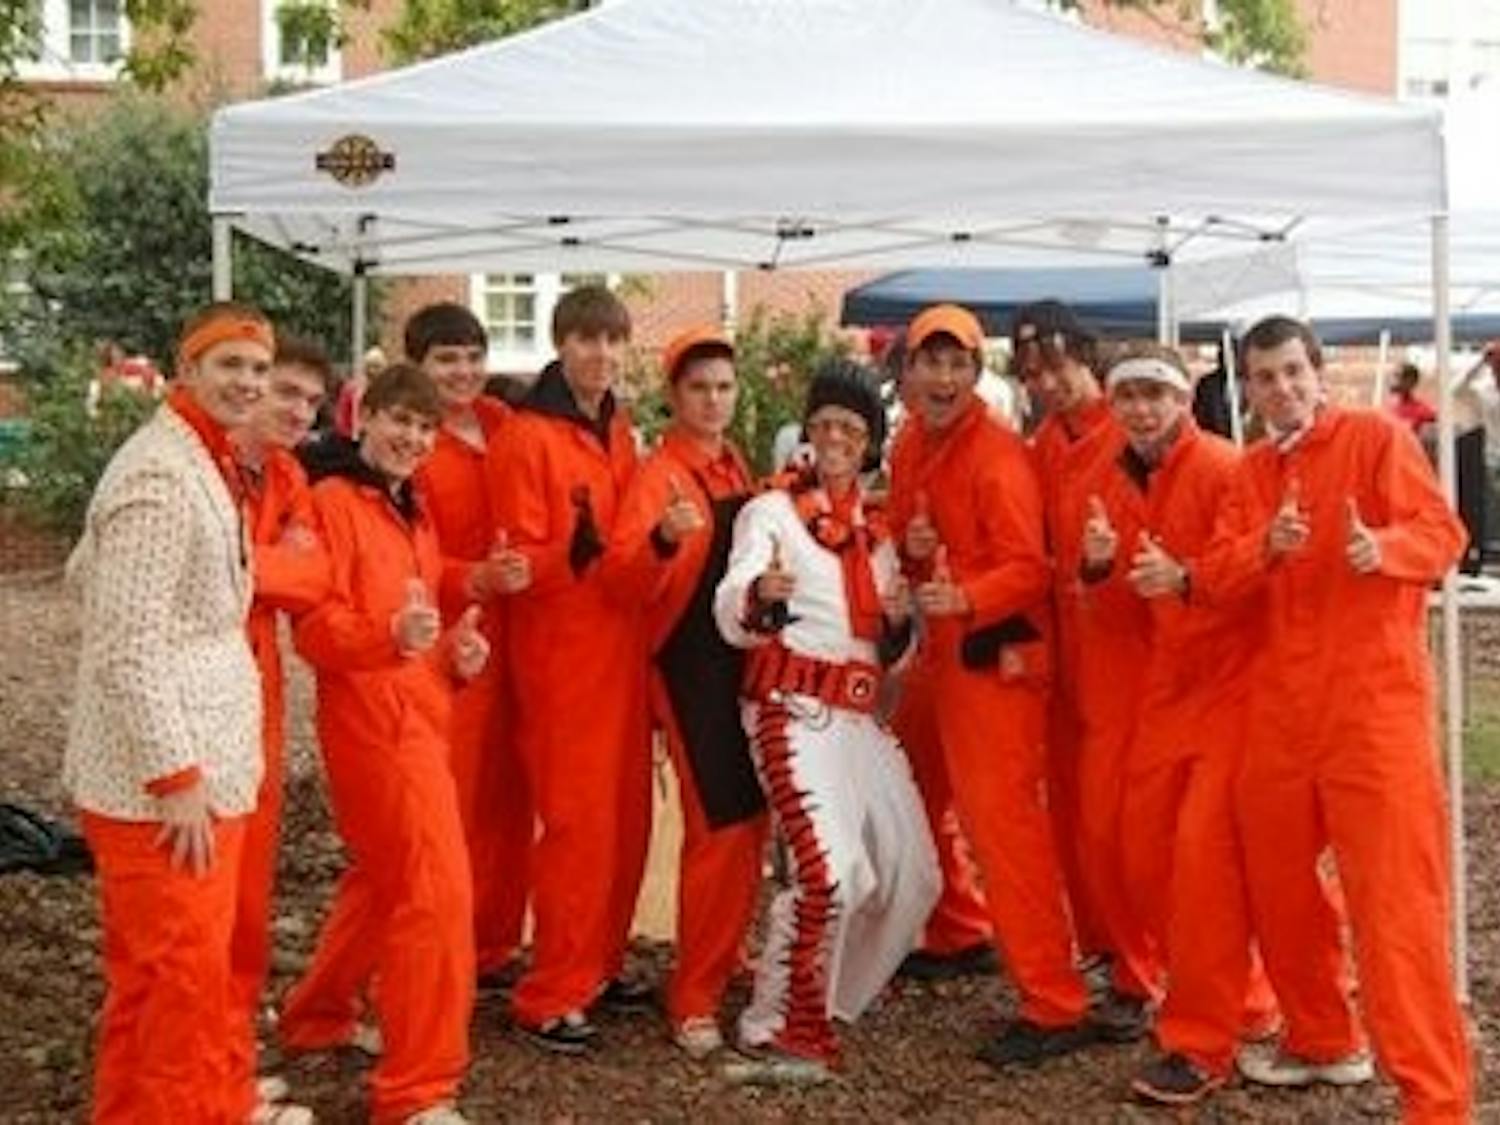 The Orange Jumpsuit Guys celebrate an Auburn victory while tailgating by Lupton Hall. (CONTRIBUTED)